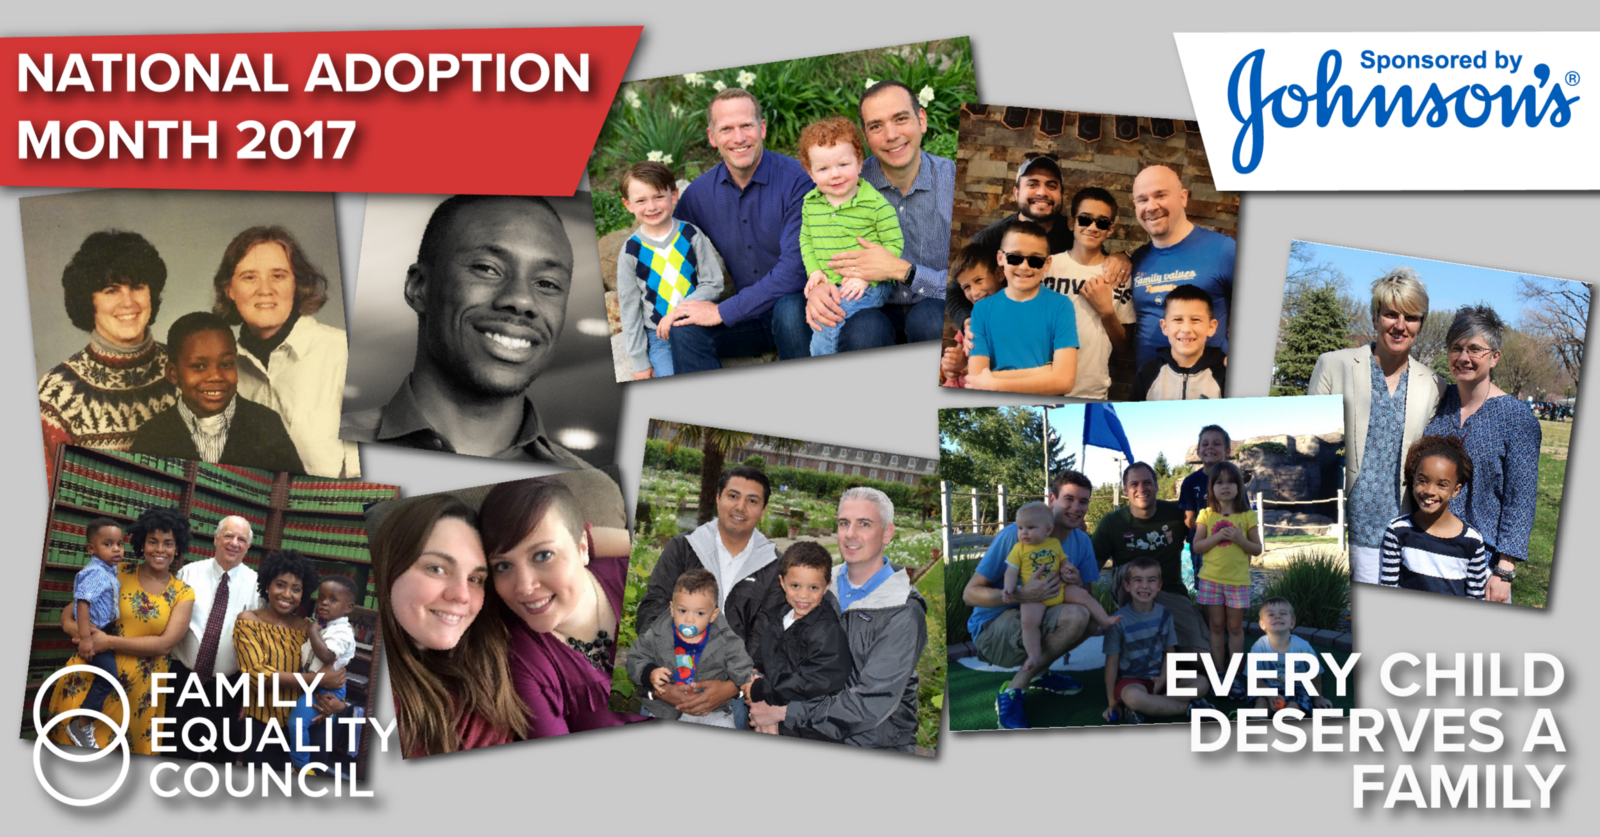 Thank You for Celebrating National Adoption Month With Us